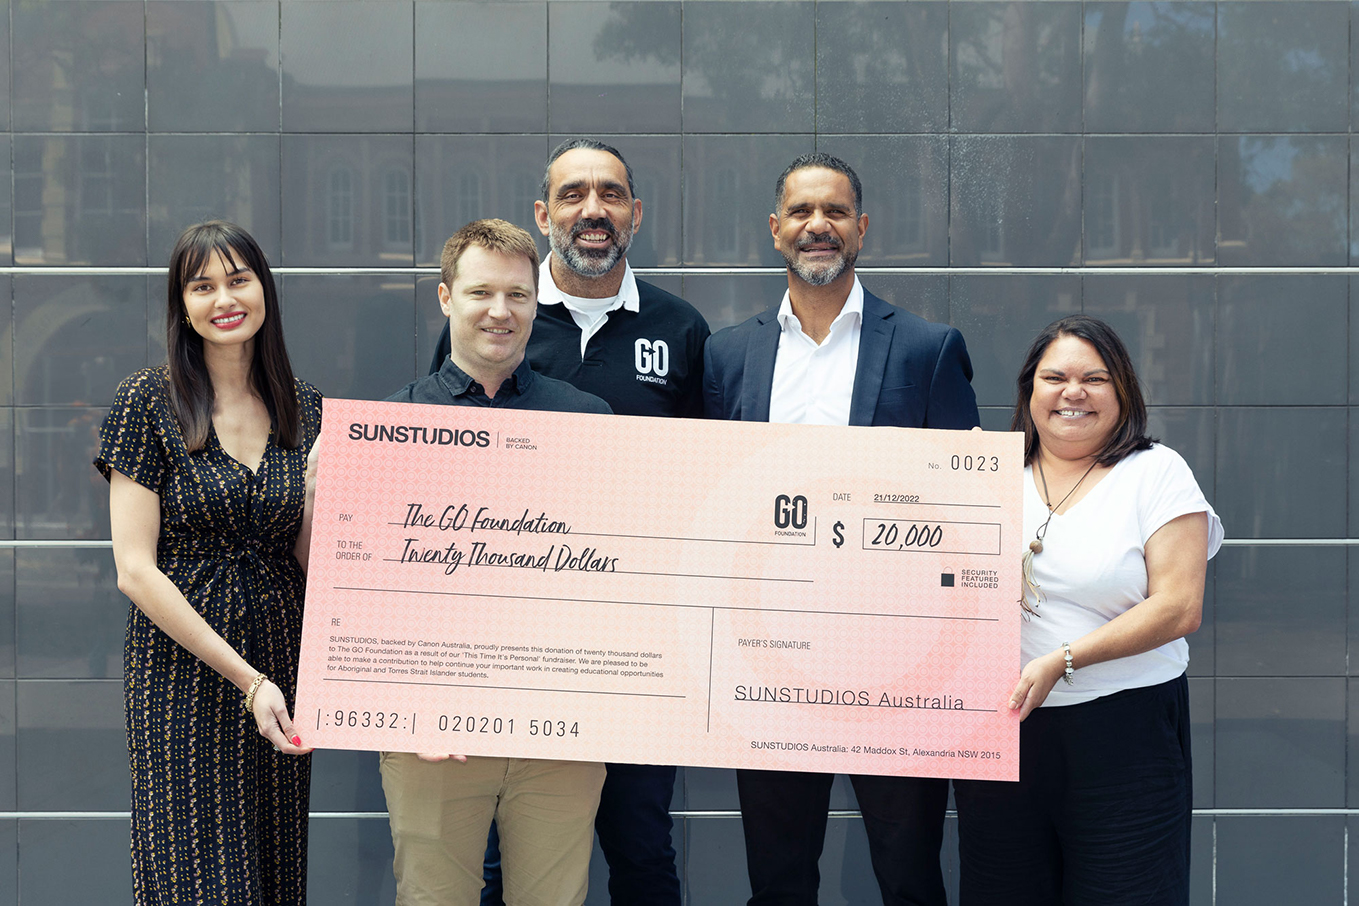 L-R: SUNSTUDIOS’ Jessica Donovan and Luke Harrison presenting the cheque to GO Foundation Co-Founders Adam Goodes and Michael O’Loughlin, and GO Founder CEO Charlene Davison